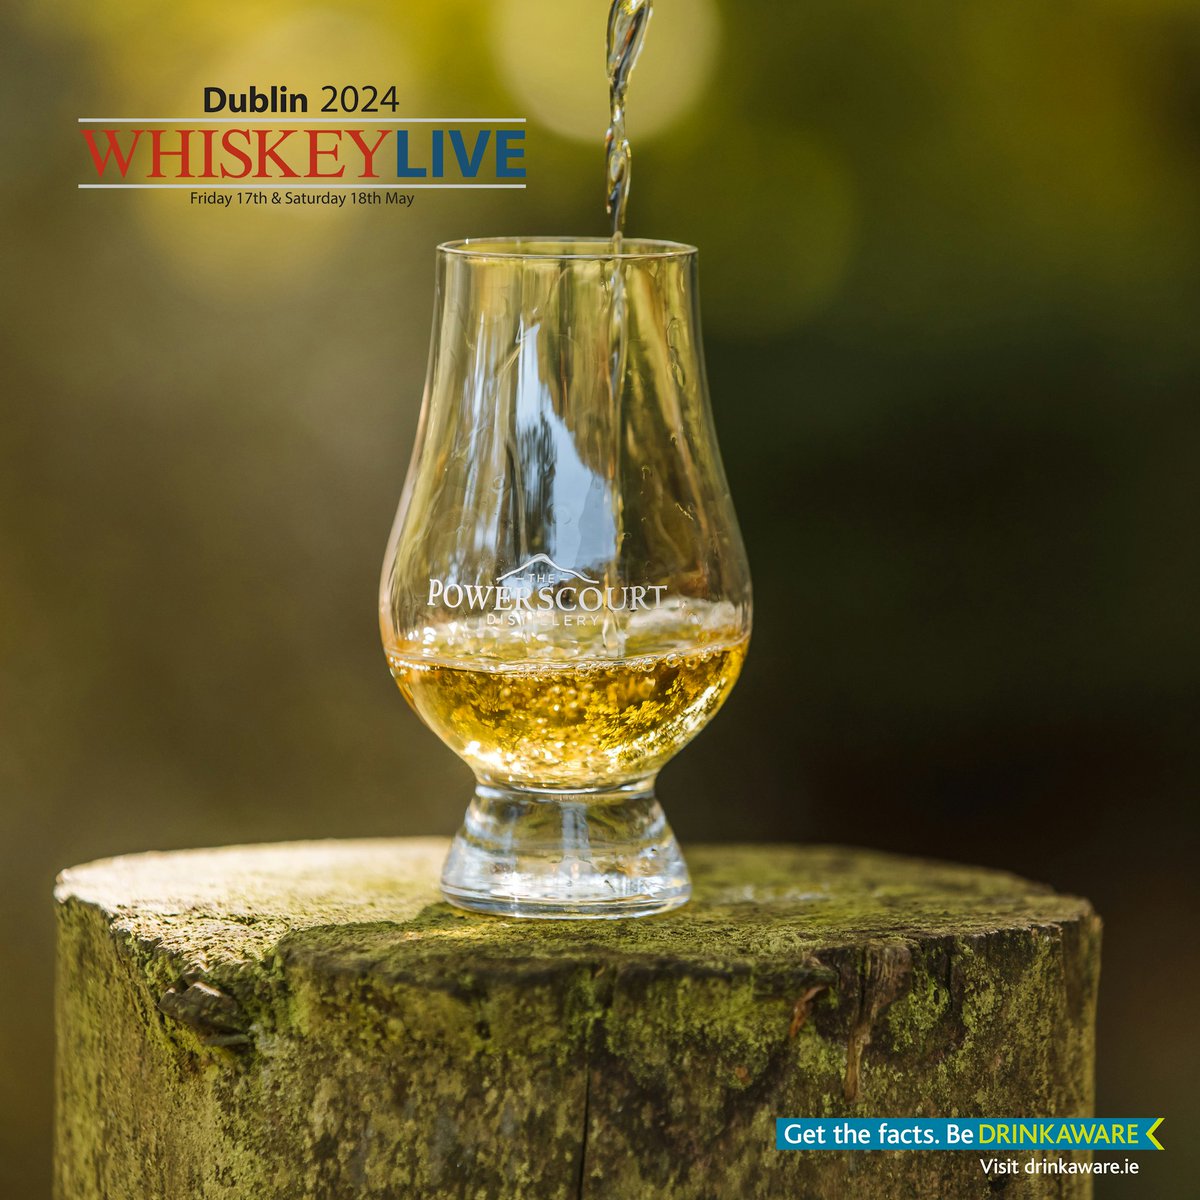 We'll be back at Whiskey Live Dublin again this year on the 17th & 18th of May 🥃 Our Head of Brand John Cashman will also be hosting a masterclass on Saturday evening: Fercullen, 'The Estate Series'. Secure your tickets now on whiskeylivedublin.com #WLD24 #WhiskeyLiveDublin